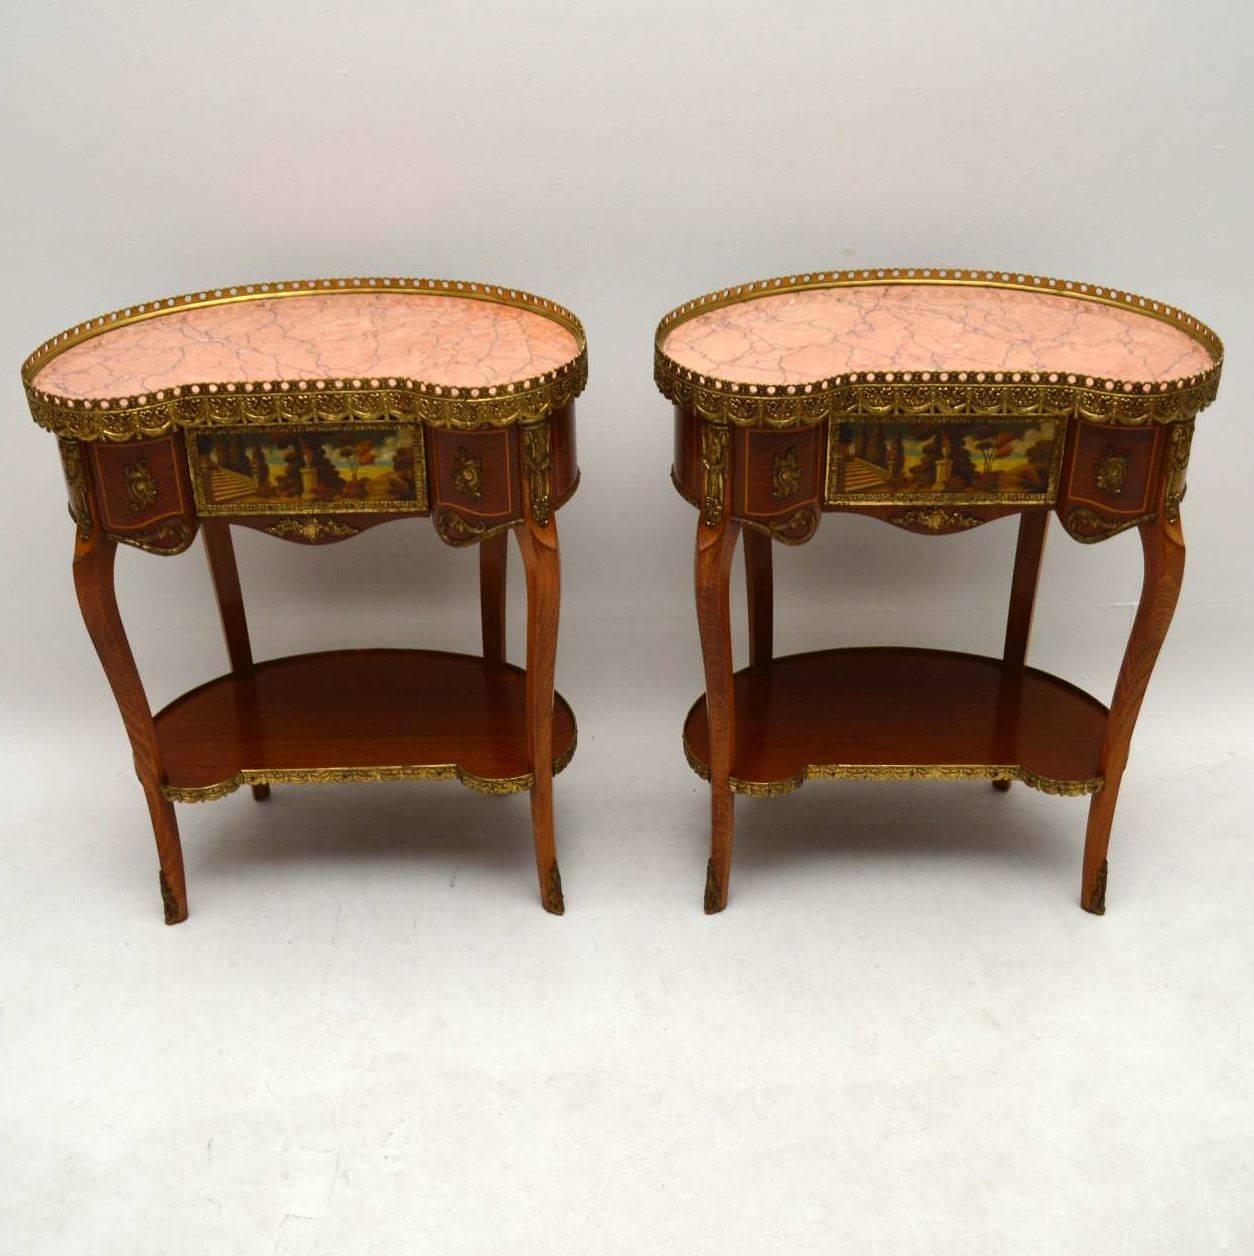 Pair of antique French style marble-top side tables in great condition and dating to around the 1950s period. They are kidney shaped, with gilt metal galleries, mounts, handles and feet. These tables are beautifully decorated all over and have